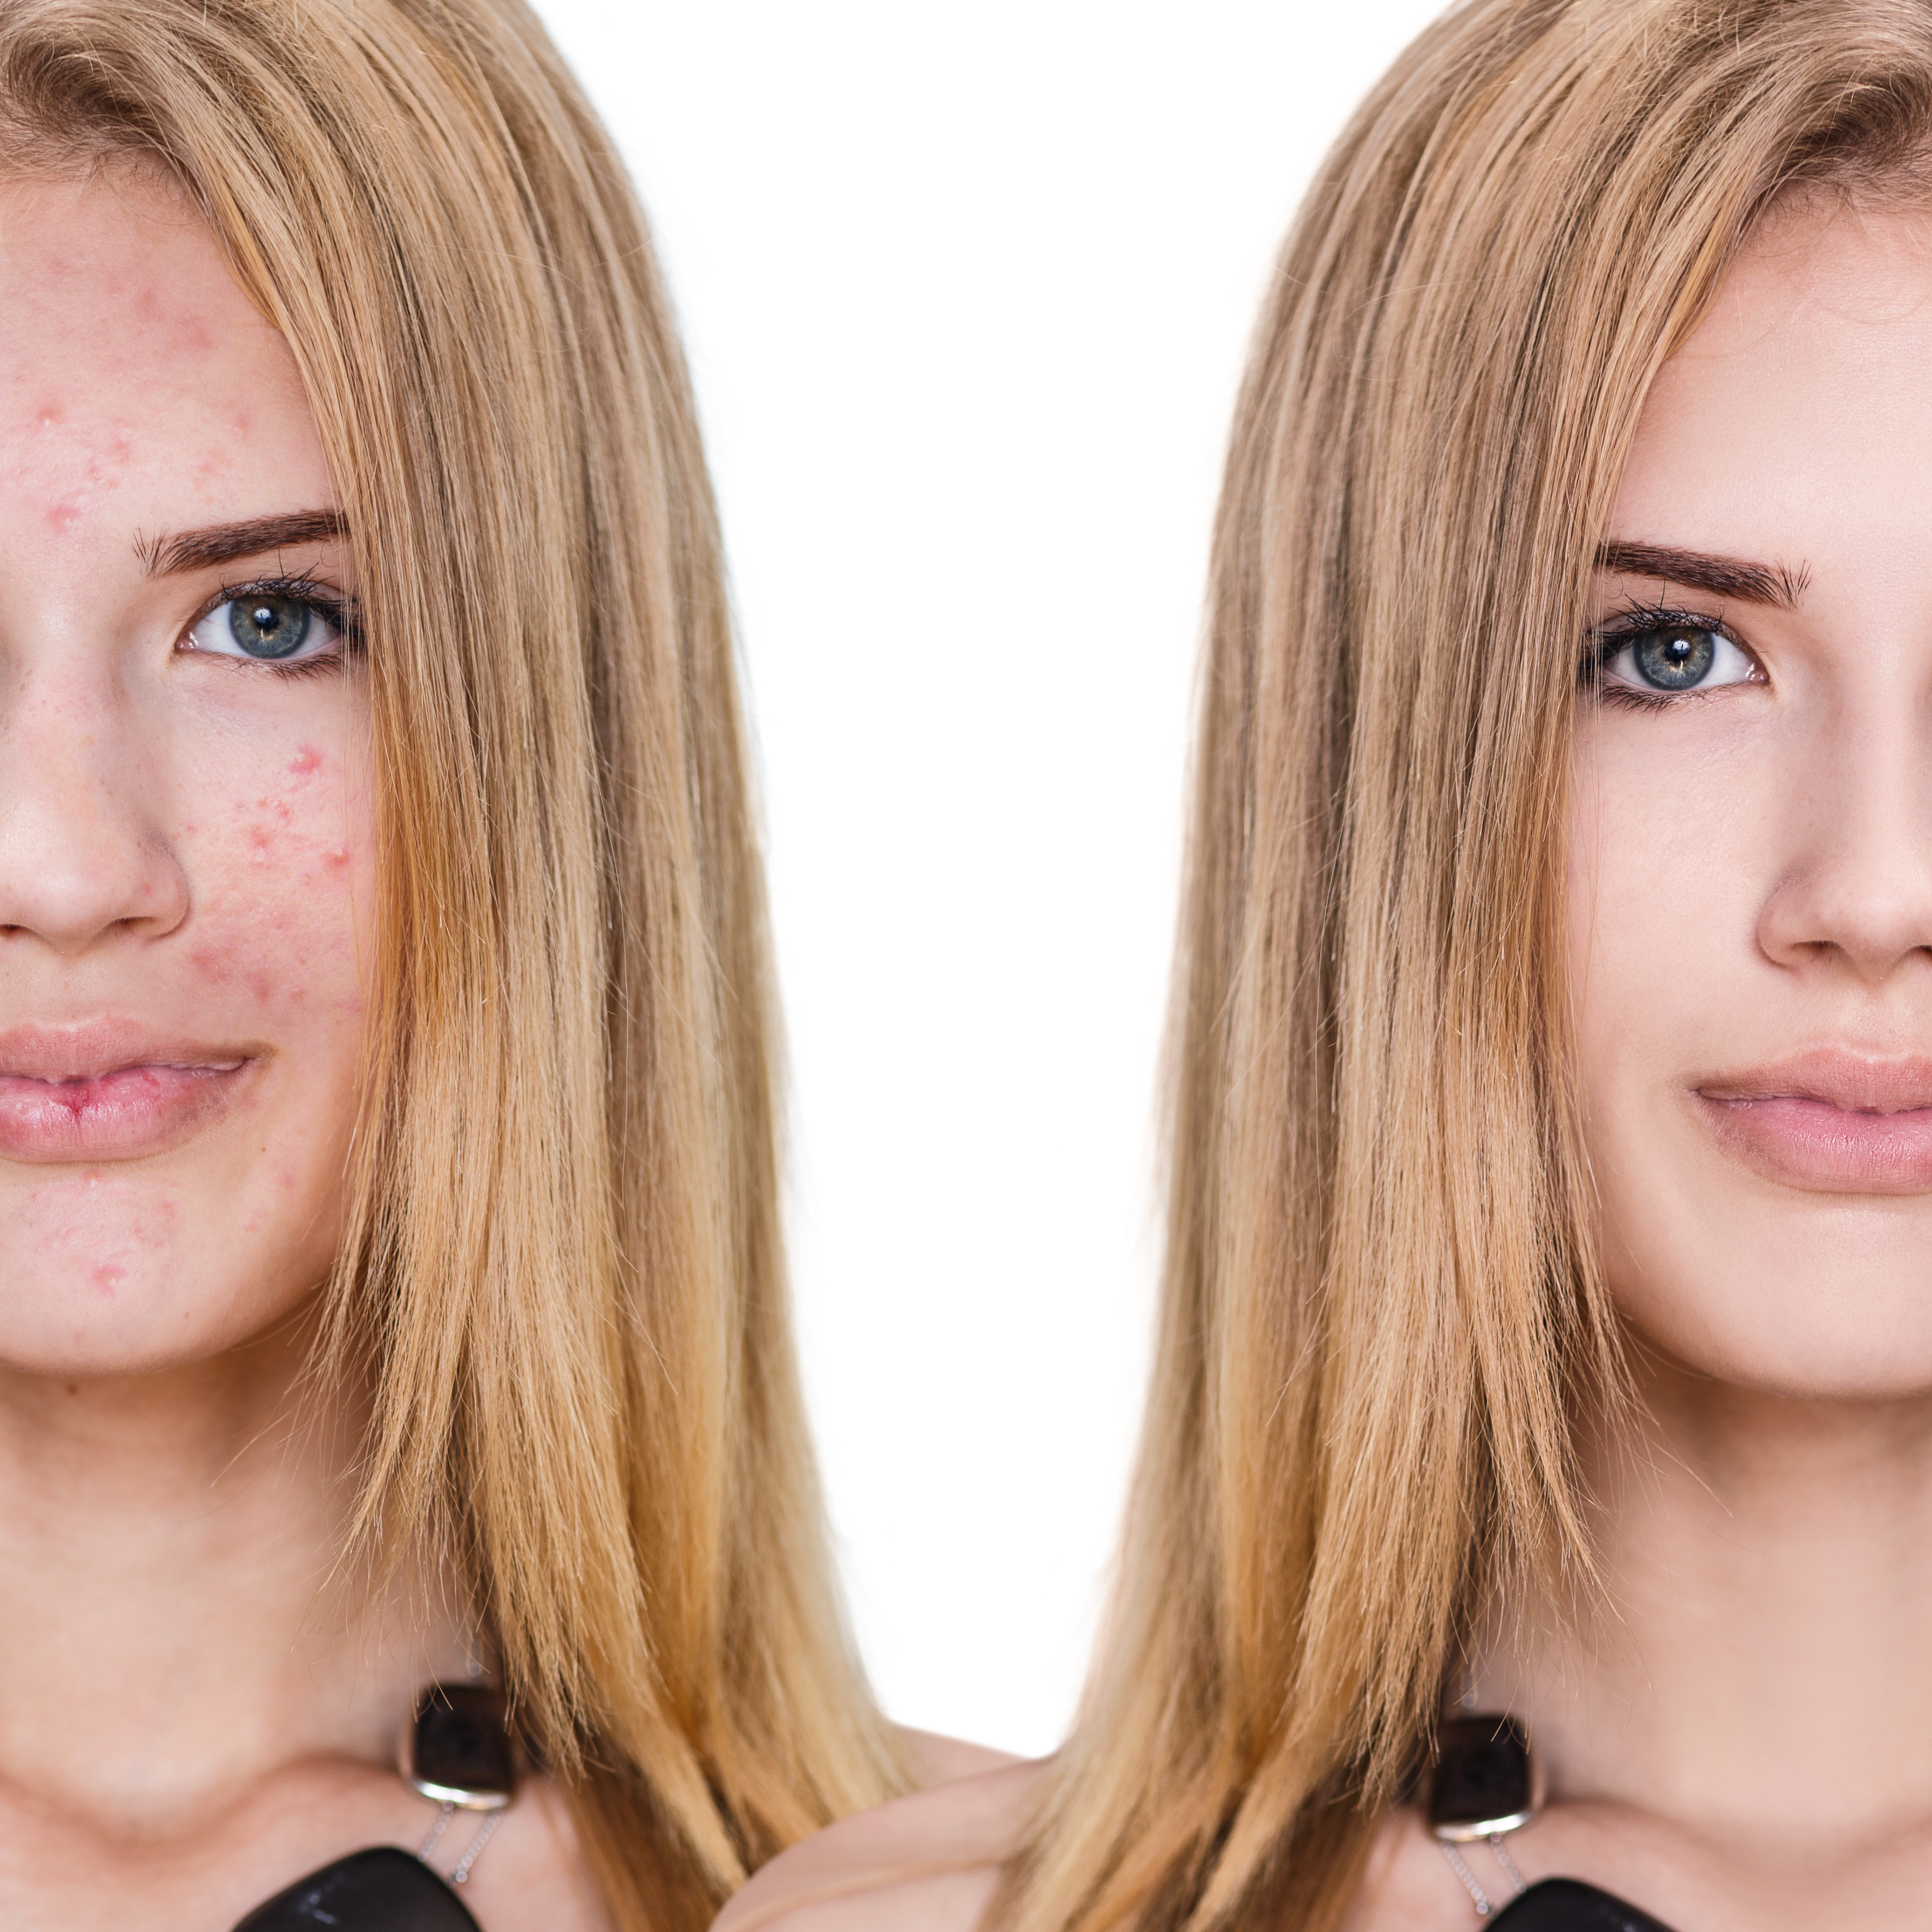 Cystic Acne: How To Get Rid Of It